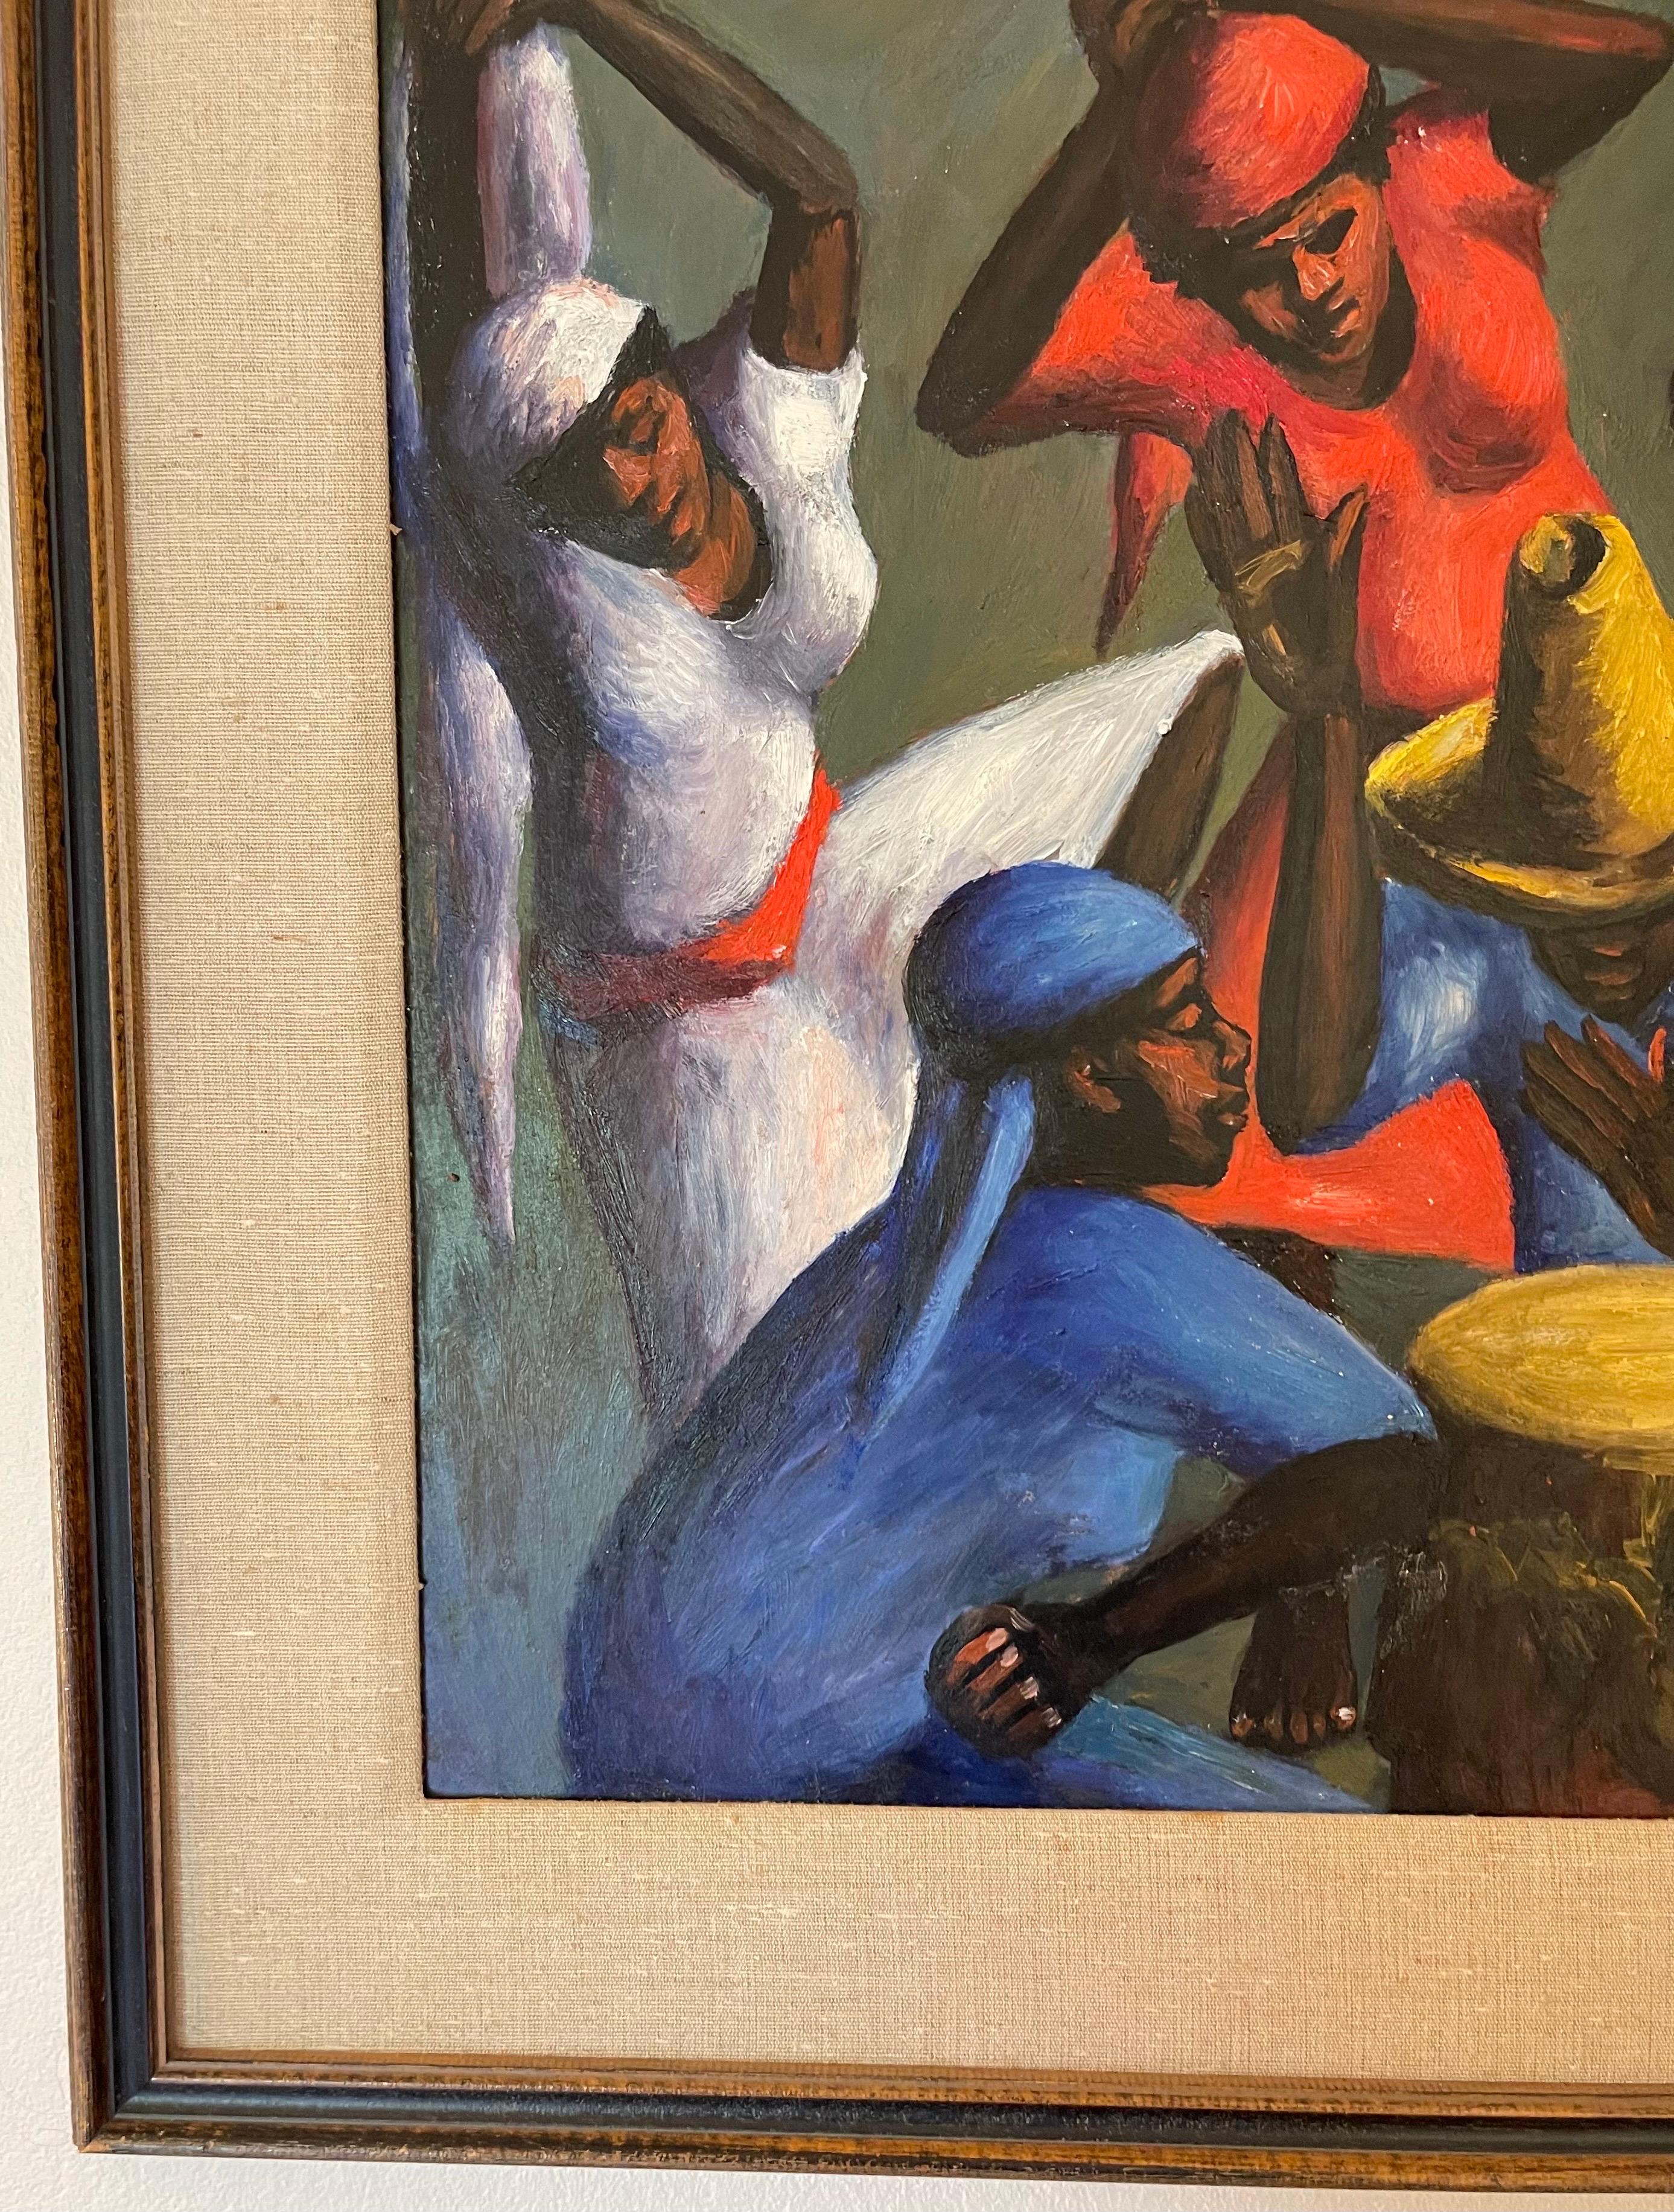 1956 Xaviar Amiana Dancers & Drummers painting. Oil on board. As found wood frame. Purchased directly from the artist in 1956 in Port Au Prince, Haiti by an American Diplomat. 
Frame is 32” wide x 28” tall. Painting is 23” wide x 19.5” tall